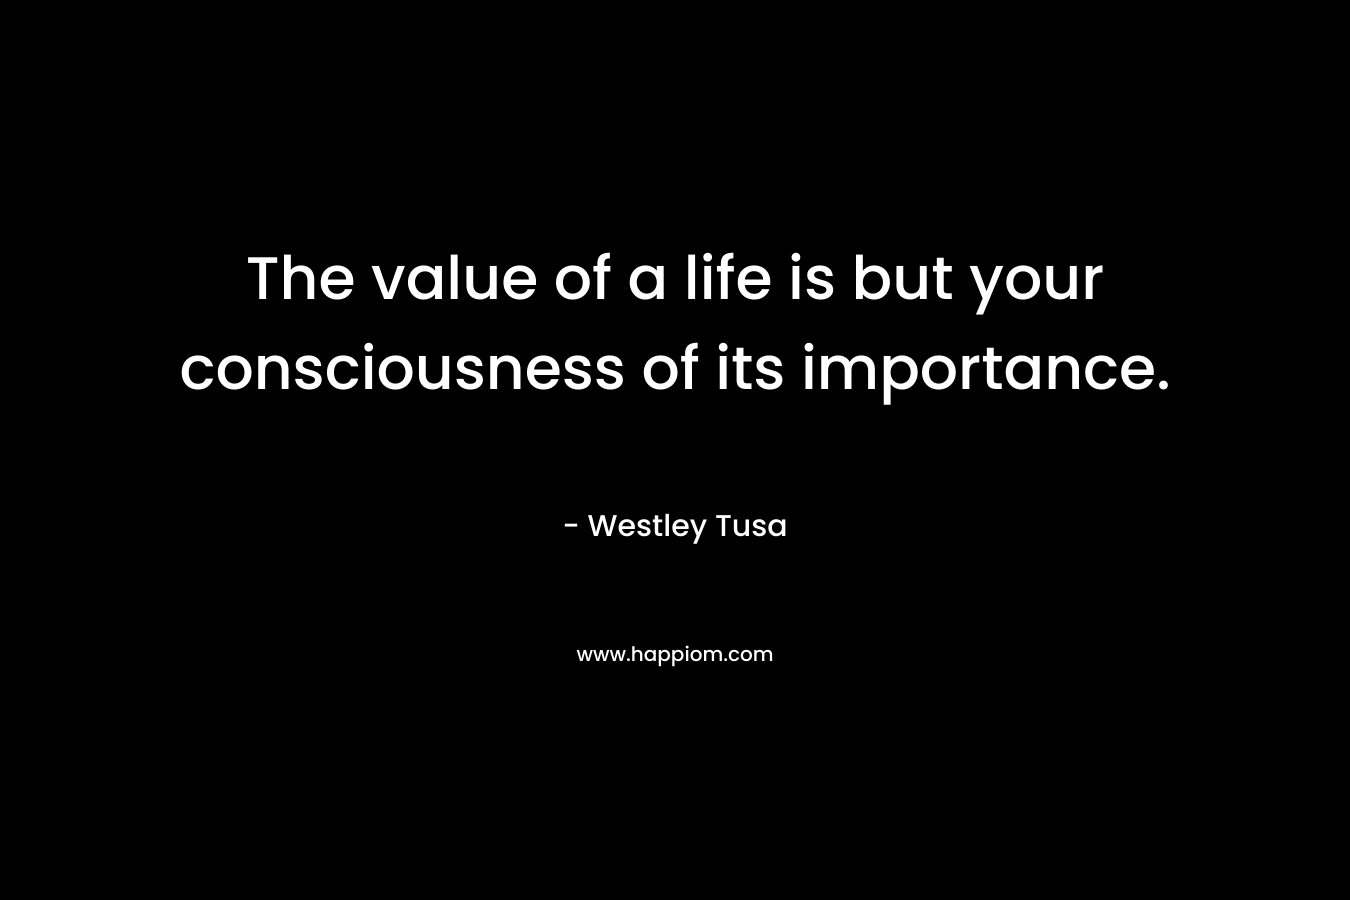 The value of a life is but your consciousness of its importance.